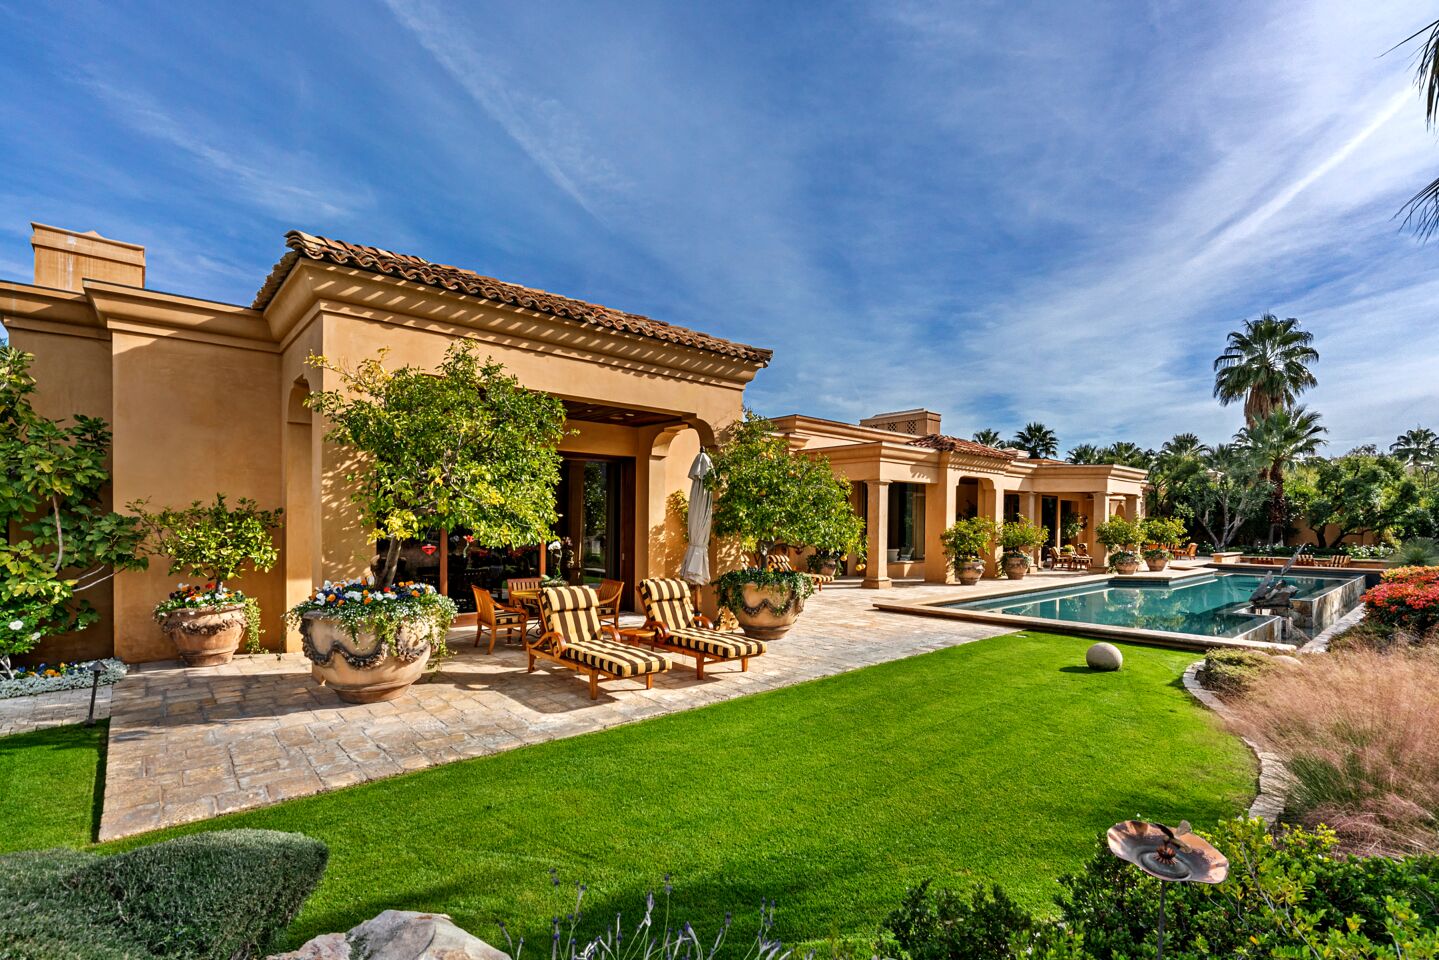 Home of the Week: A Mediterranean oasis dazzles in Palm Desert - Los ...